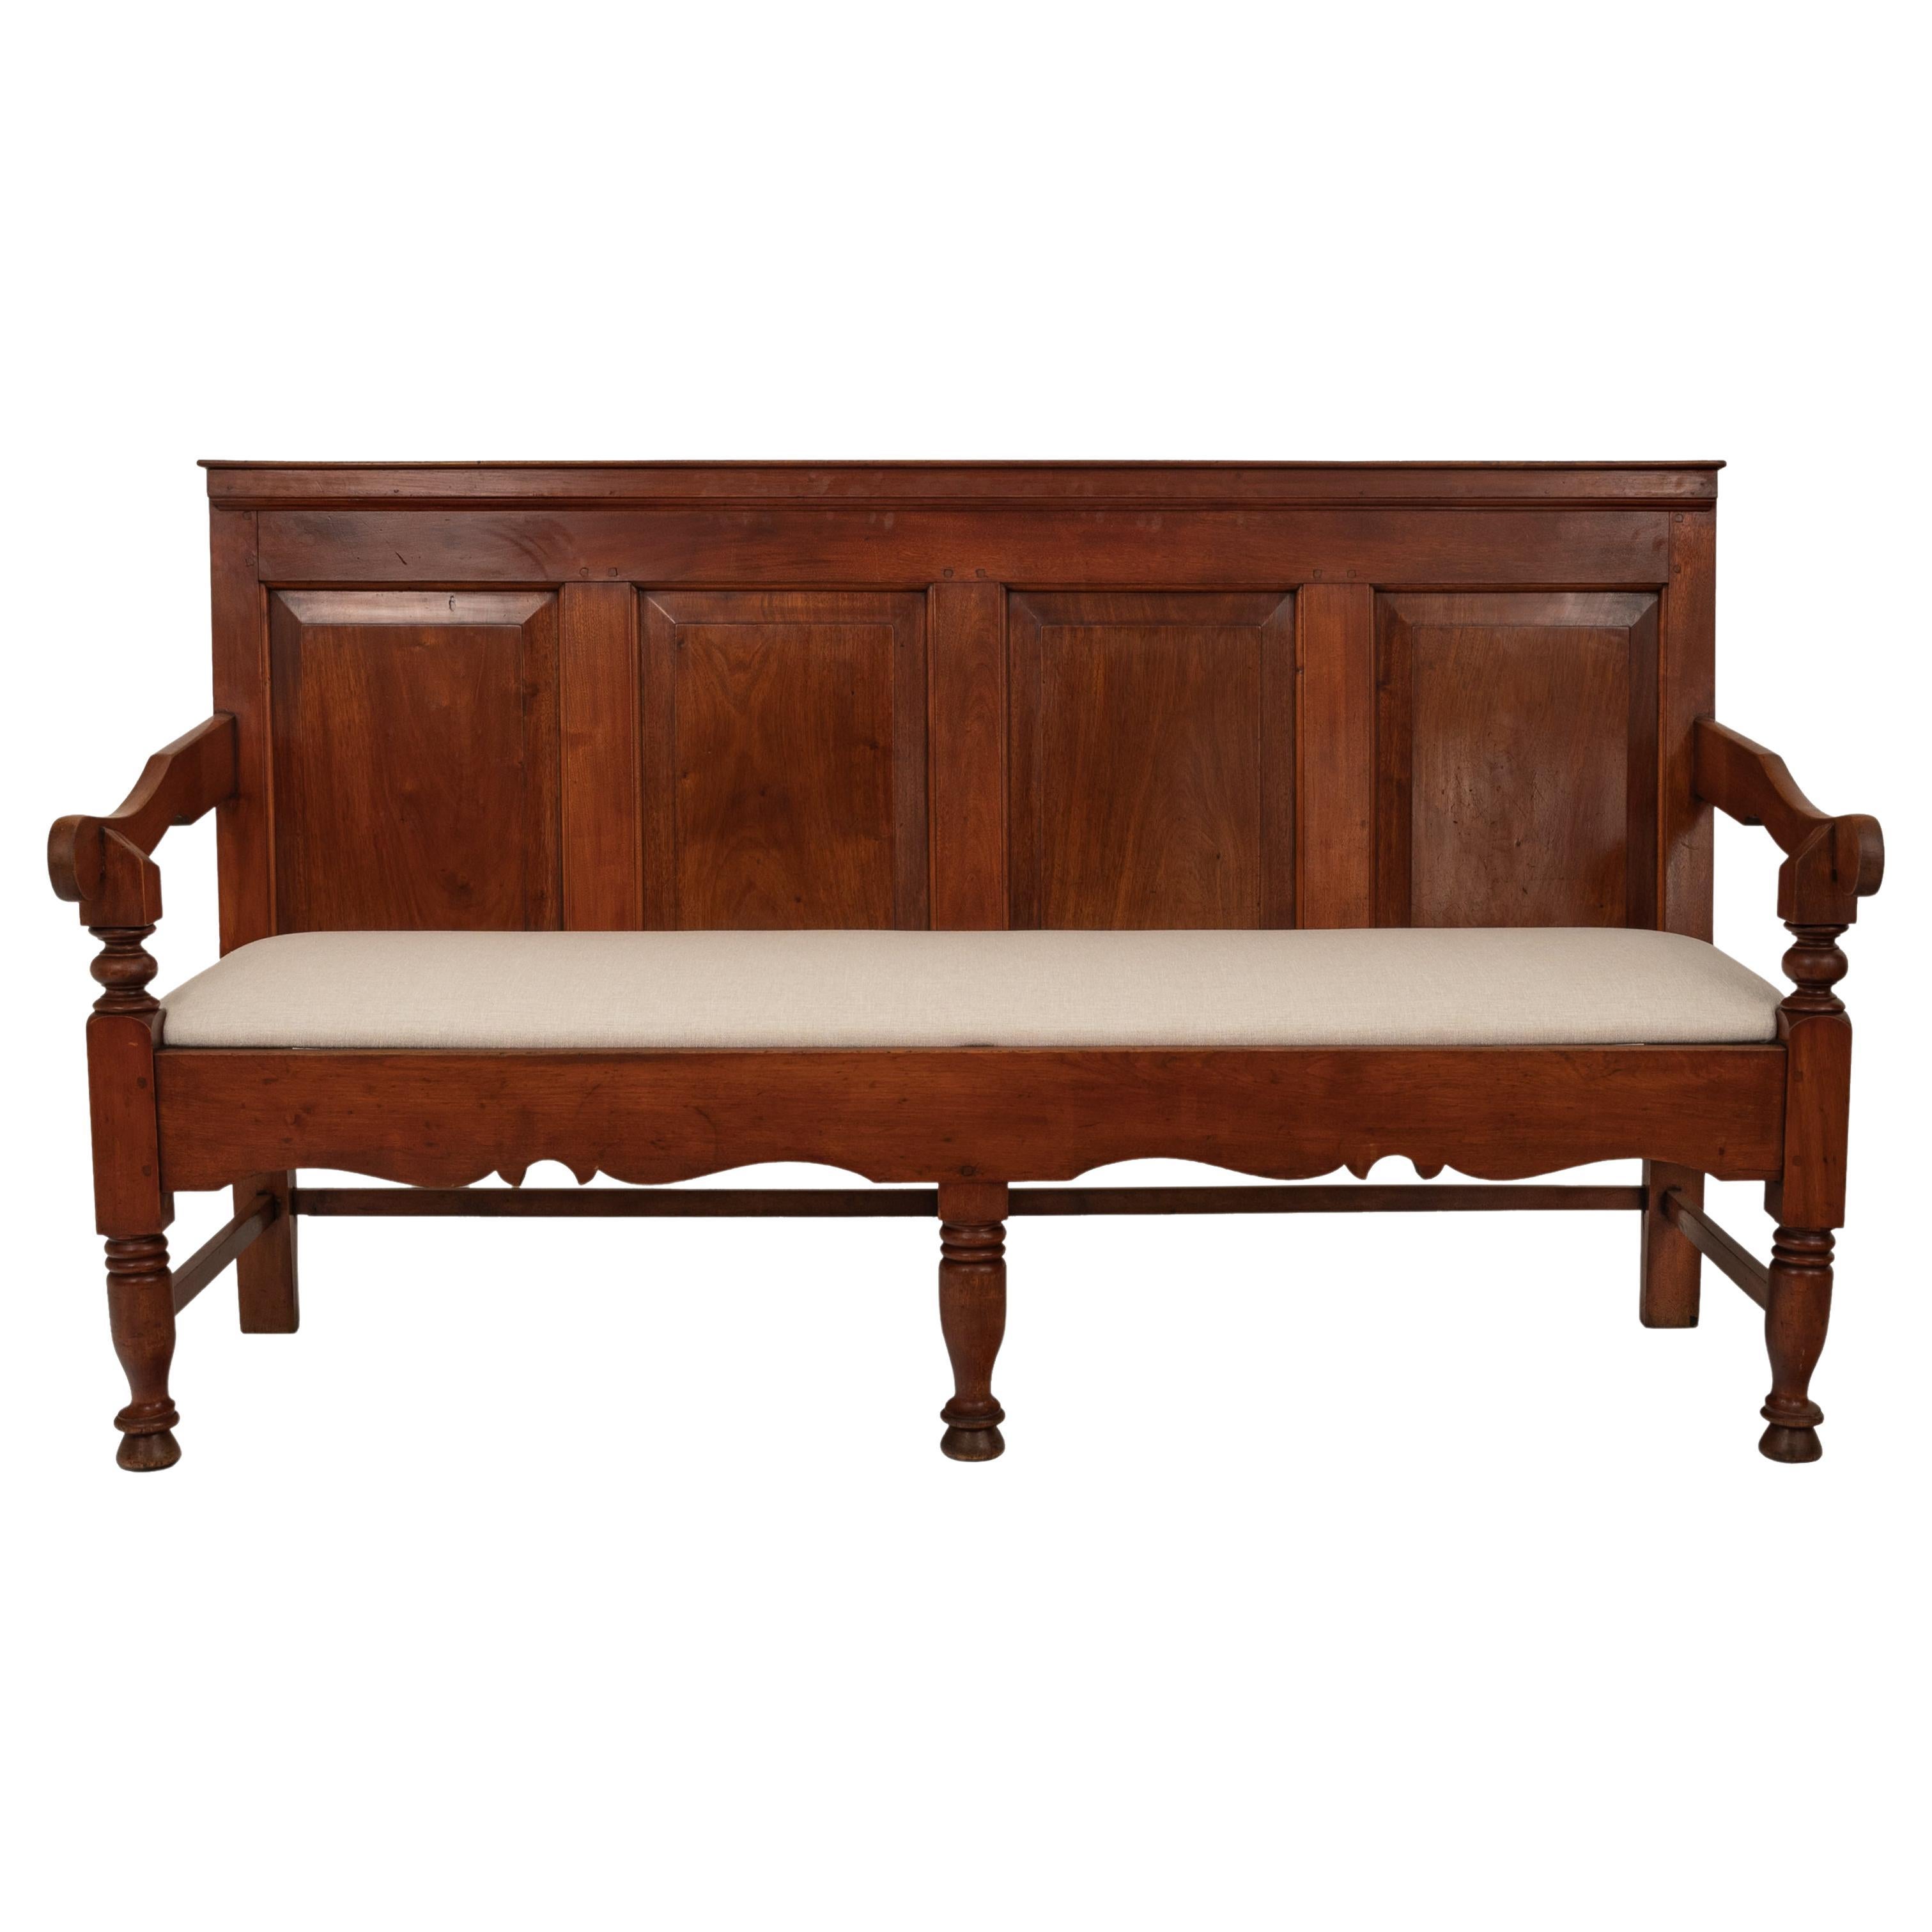 A very good antique American Colonial paneled cherry tavern settle/bench, Circa 1780.
The bench most likely from New England having four fielded panels to the back and a curved armrest at each side, each raised on turned supports. The drop in seat